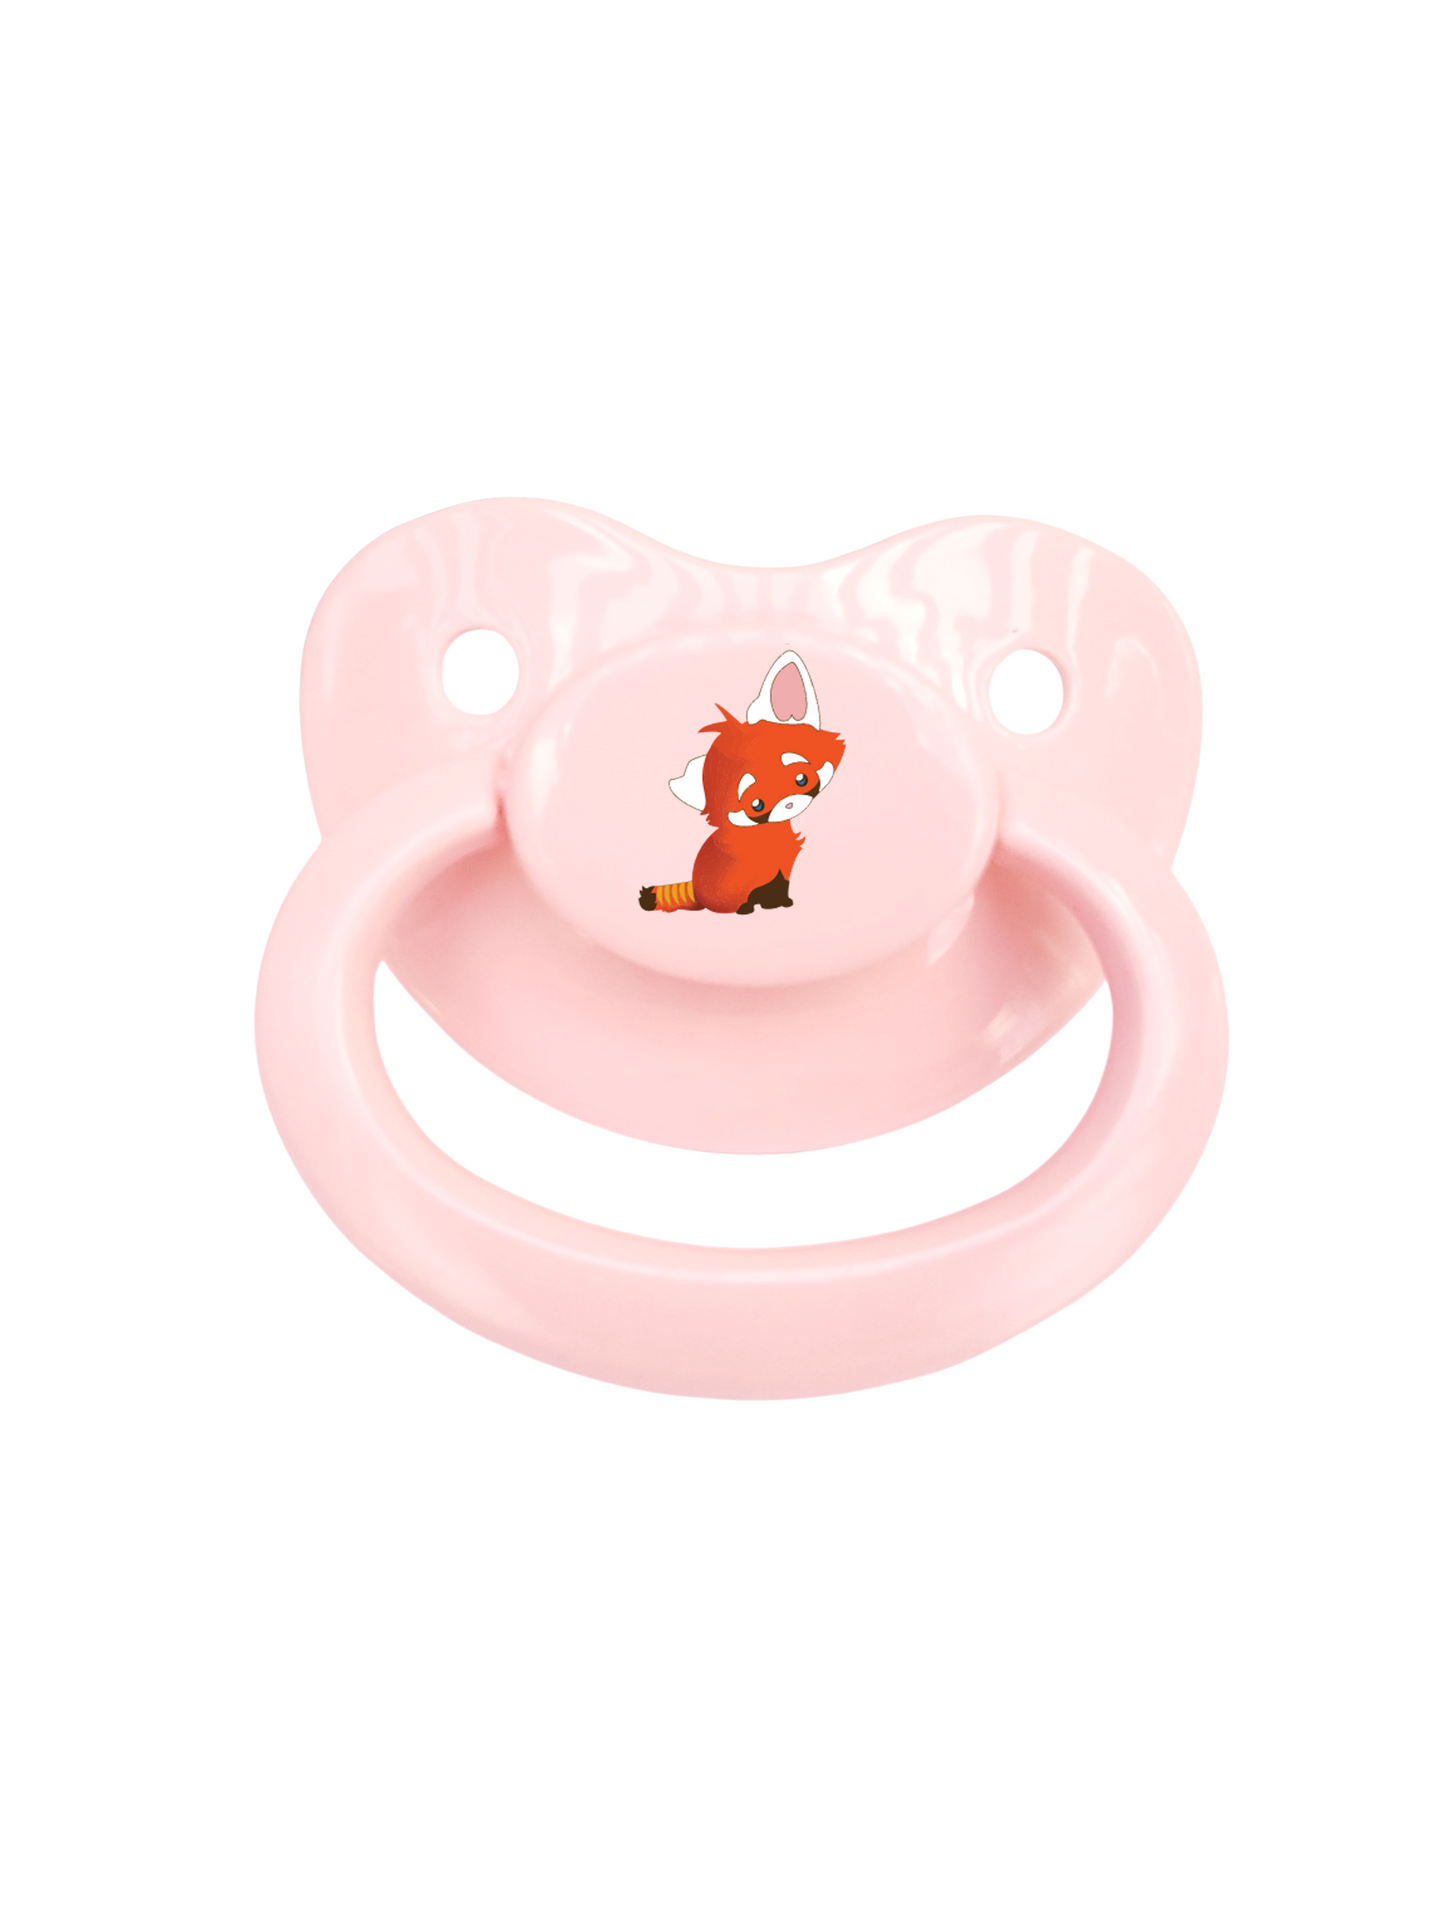 Red Panda Adult Pacifier